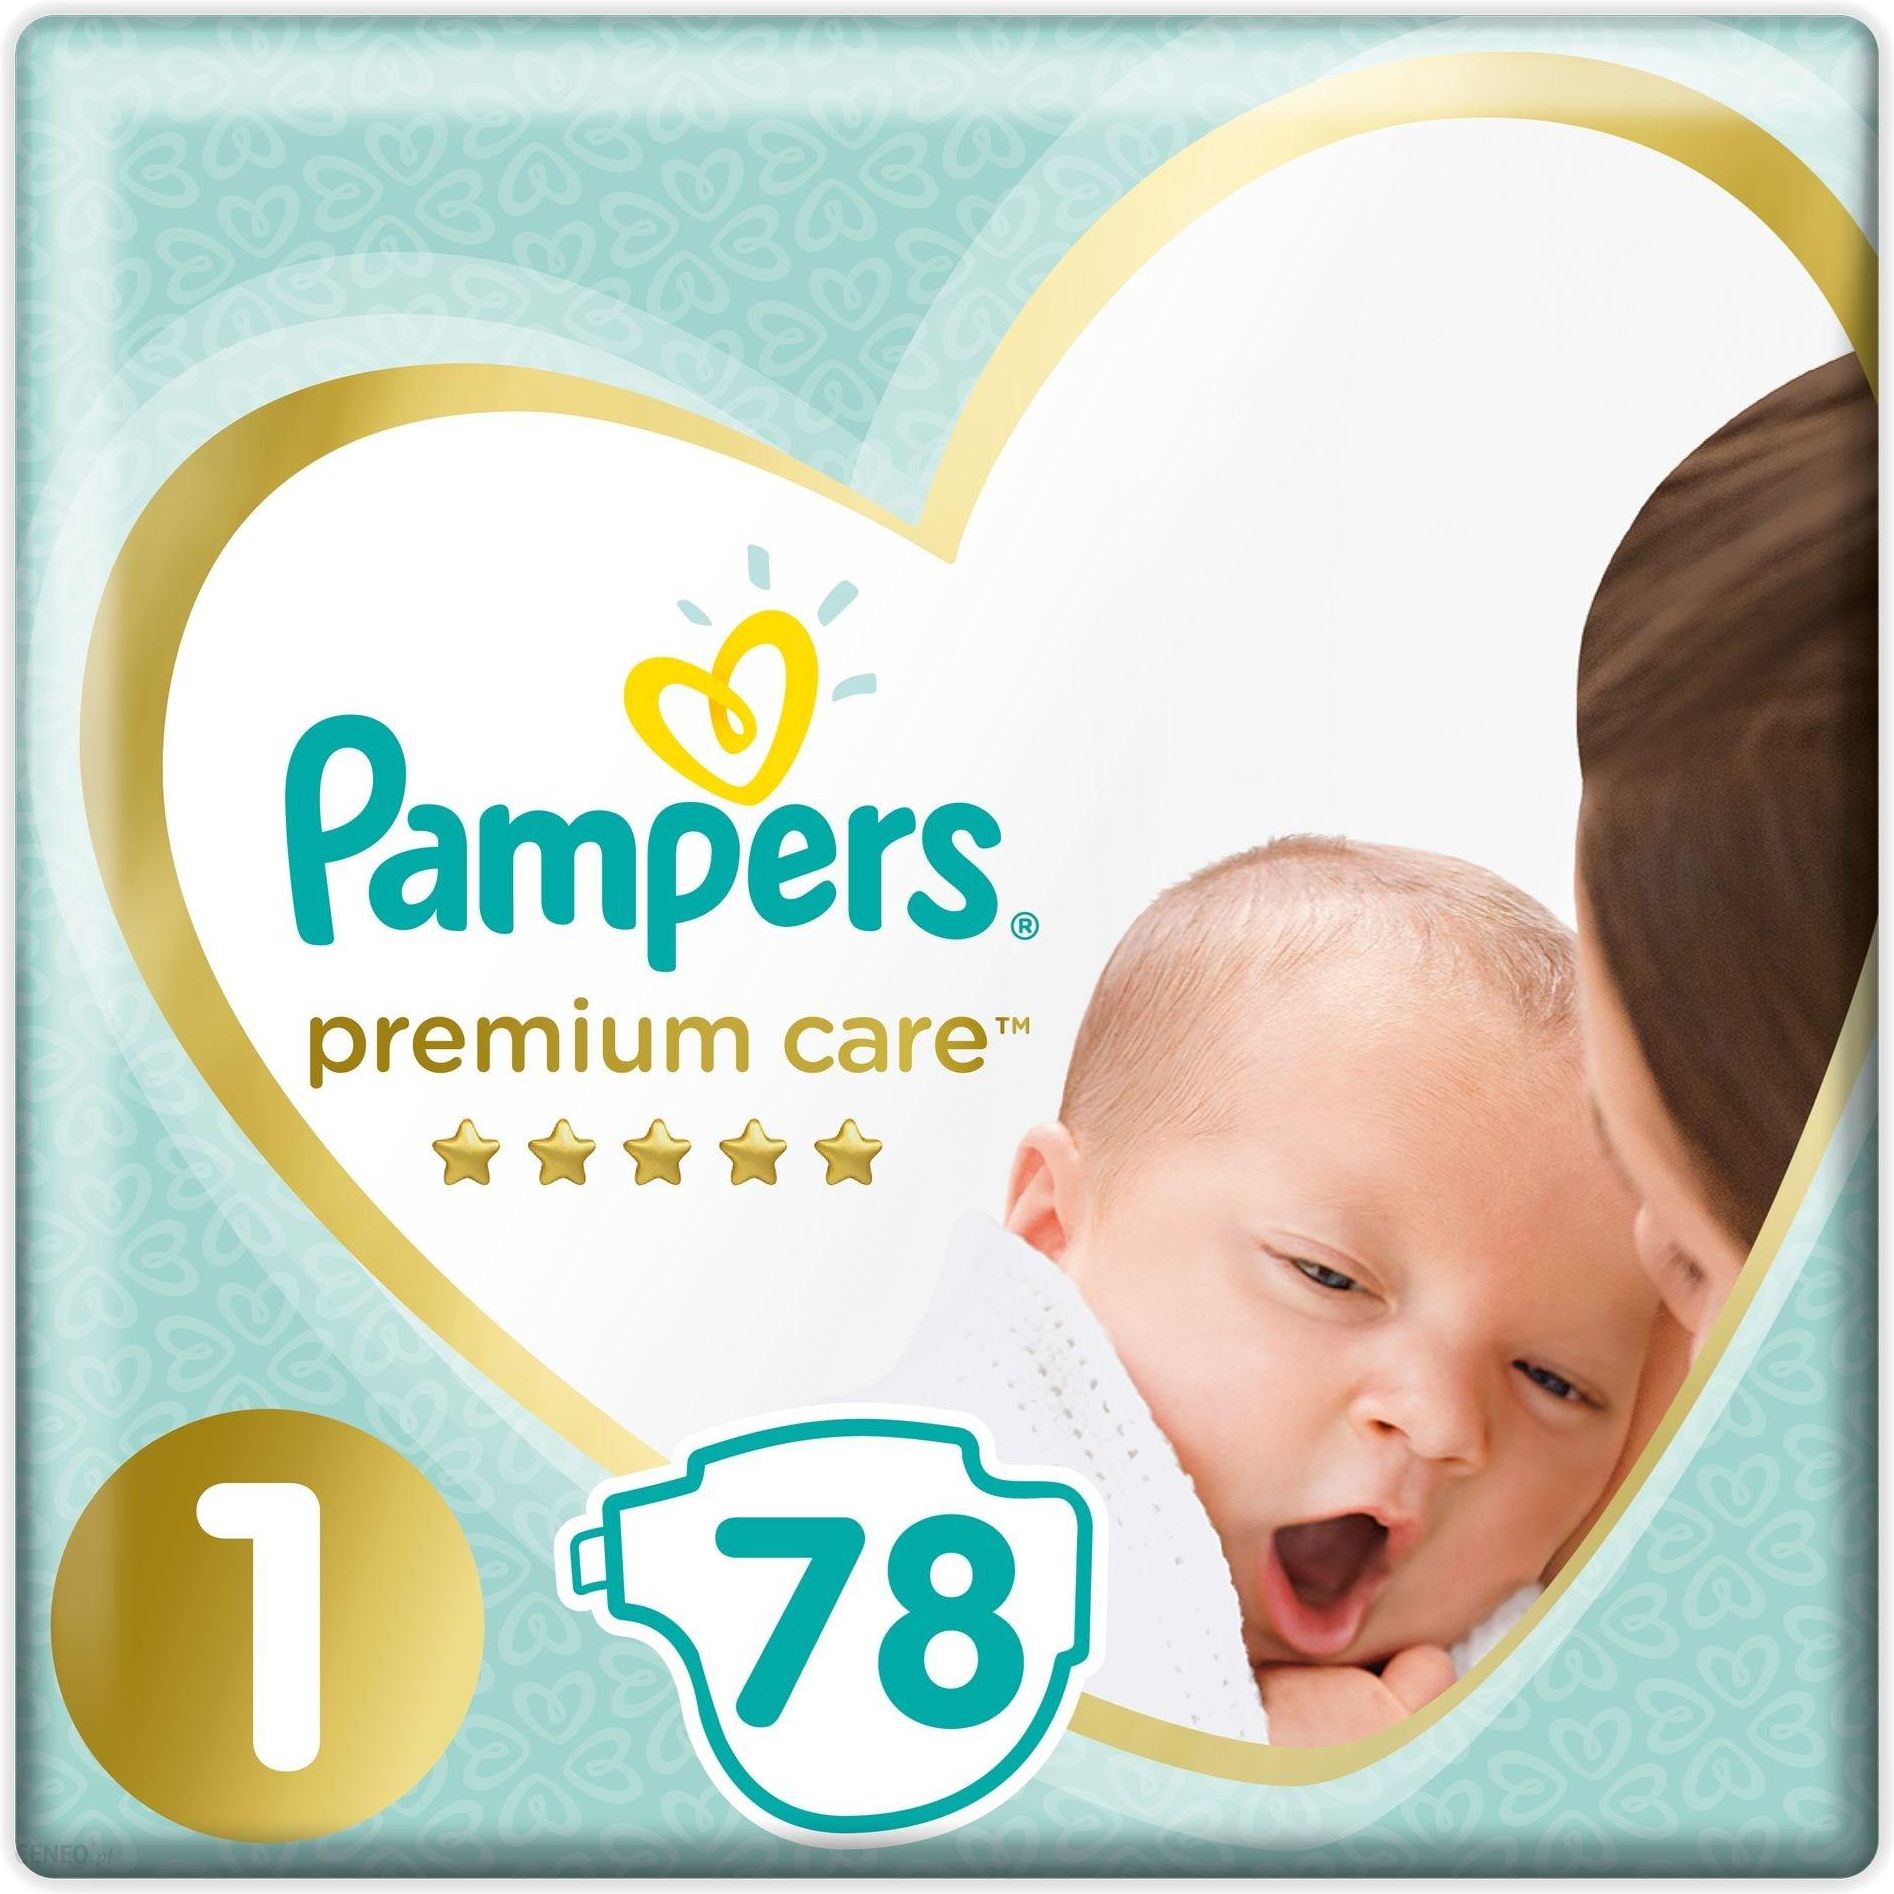 pampers do wody emag